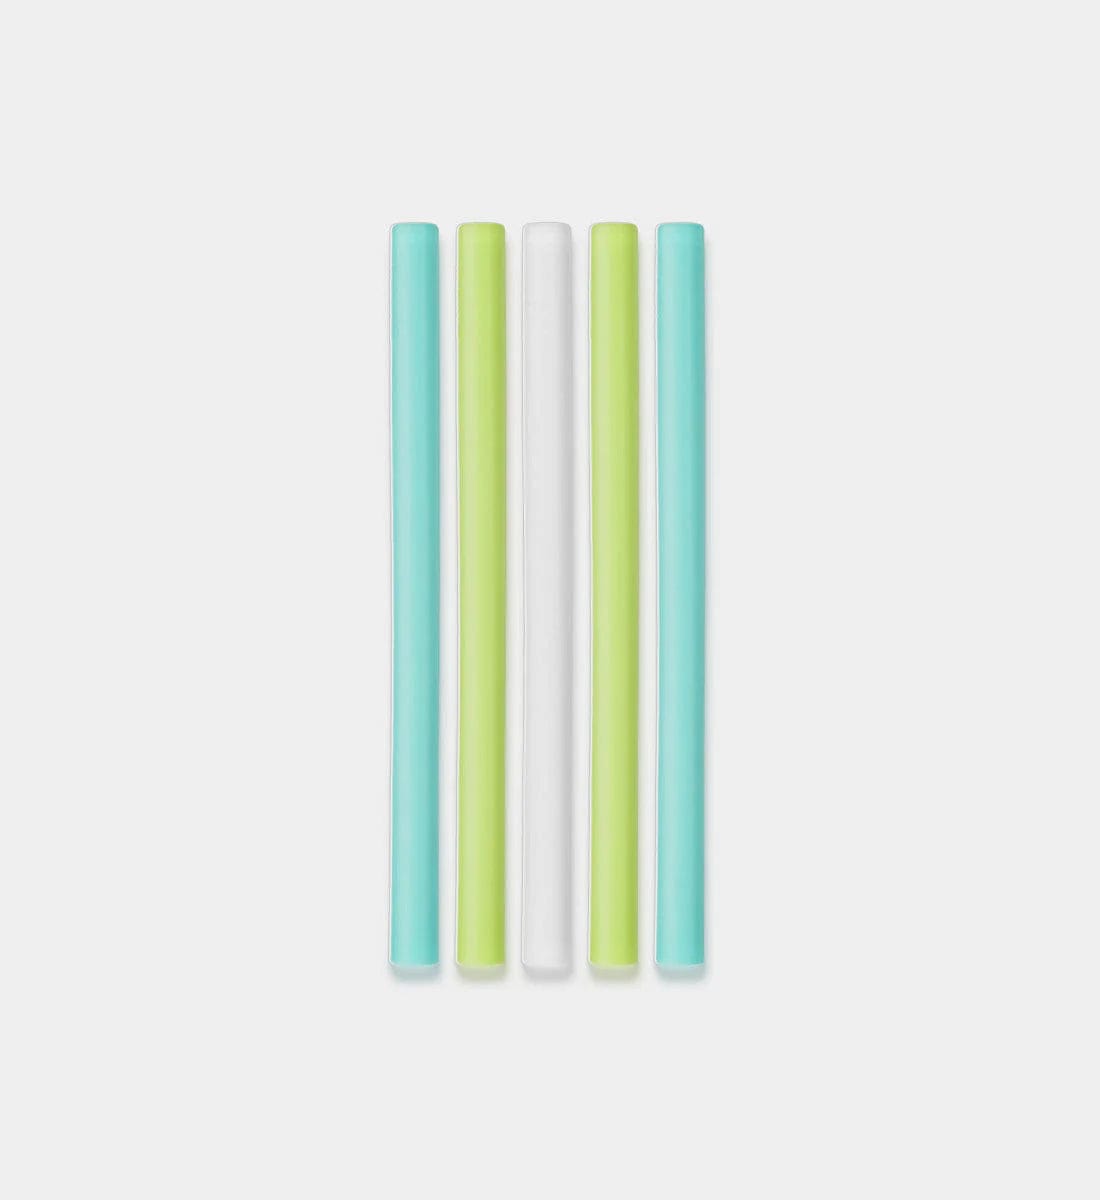 http://www.liltulips.com/cdn/shop/files/mini-reusable-silicone-straw-green-white-frost-5pk-silikids-silikids-lil-tulips-30921309913206.webp?v=1698291848